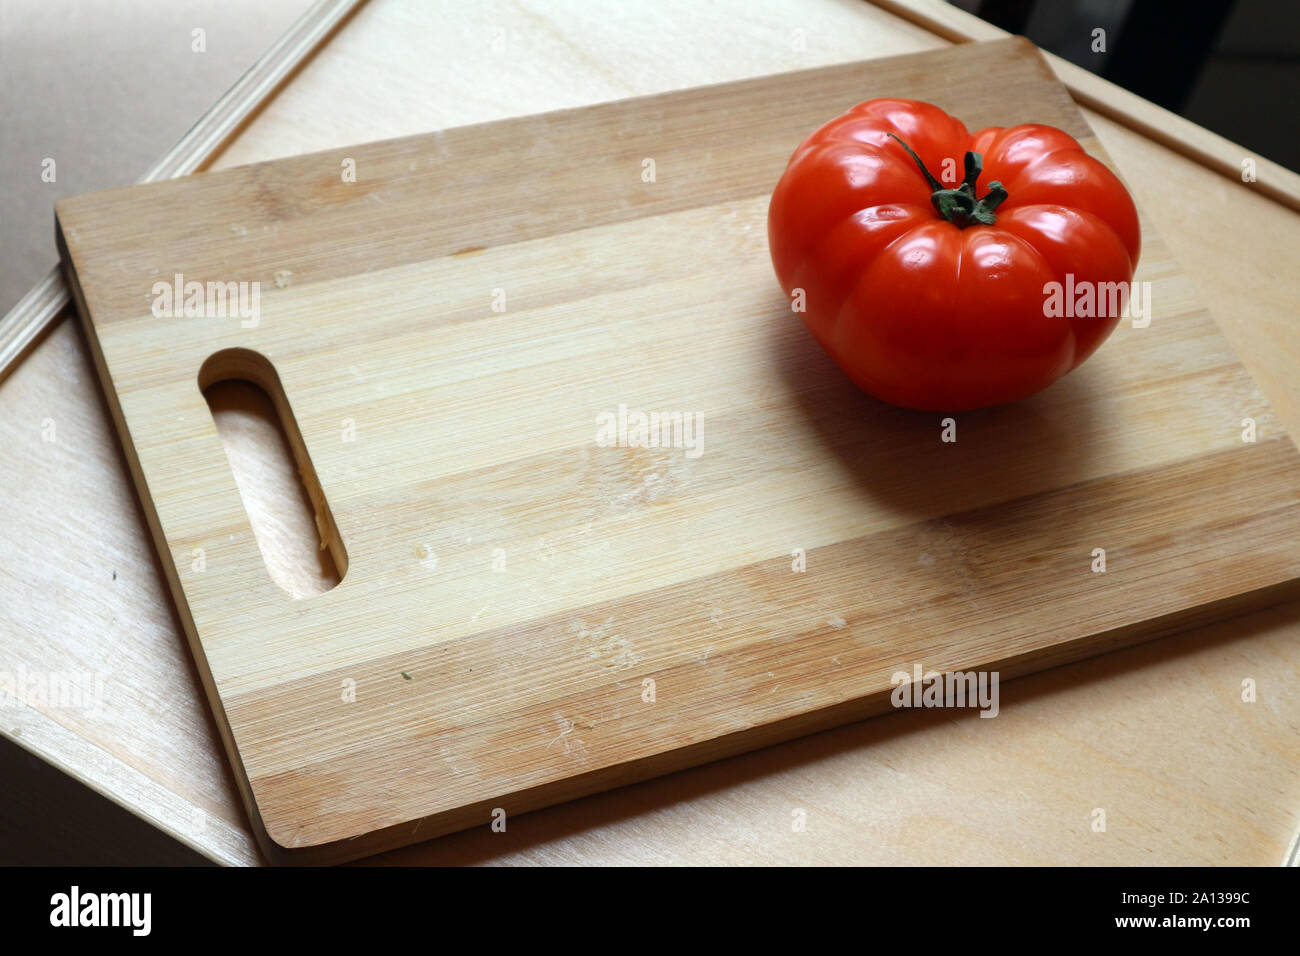 Single large ripe red whole tomatoes on chopping board Stock Photo